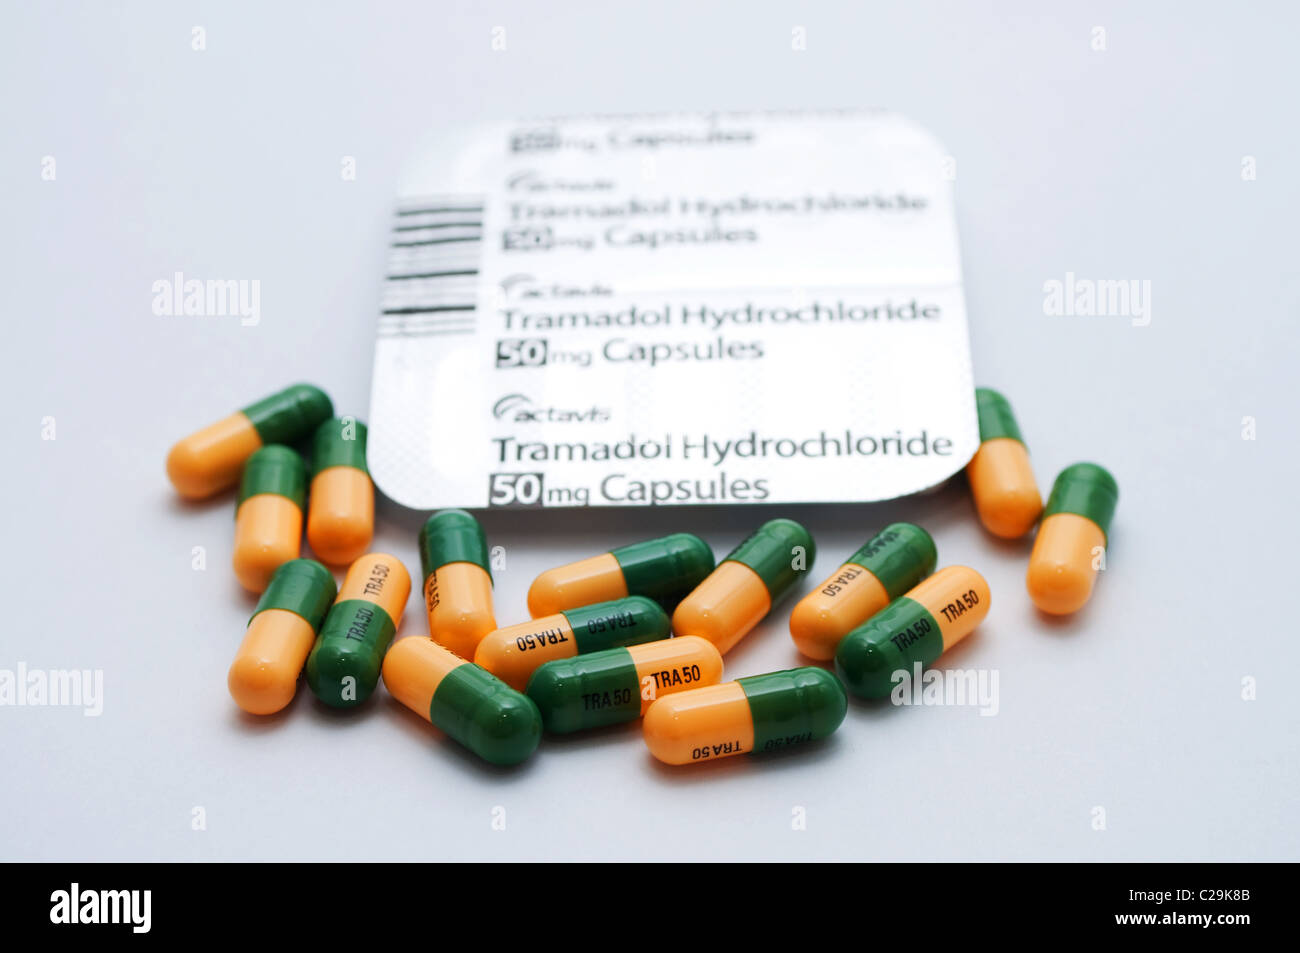 Tramadol 50mg Capsules For Sale